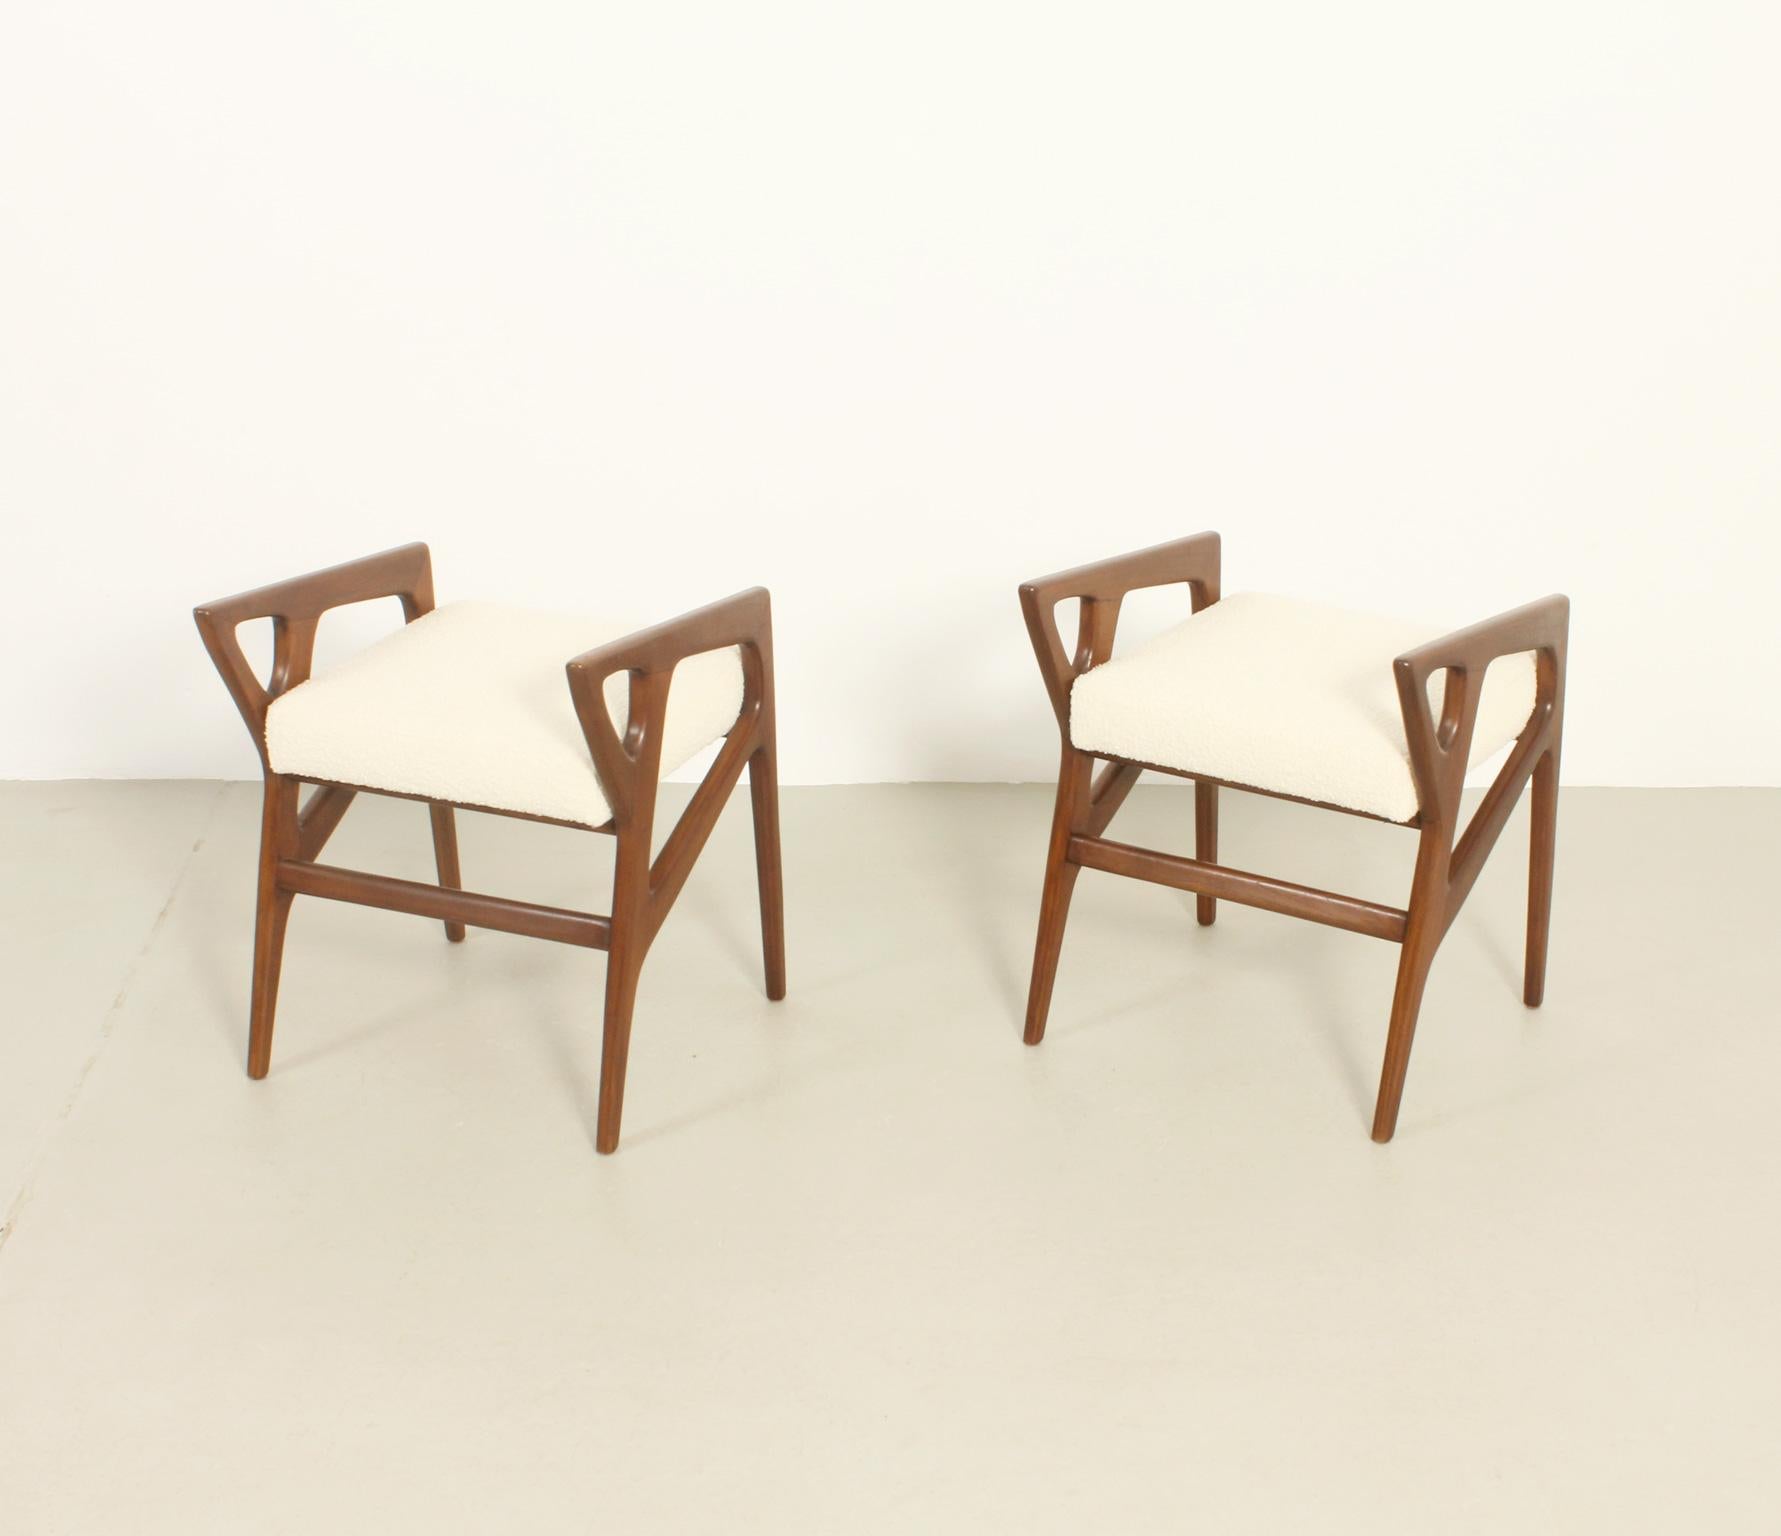 Pair of Stools by Gio Ponti for Cassina, Italy, 1953 For Sale 6